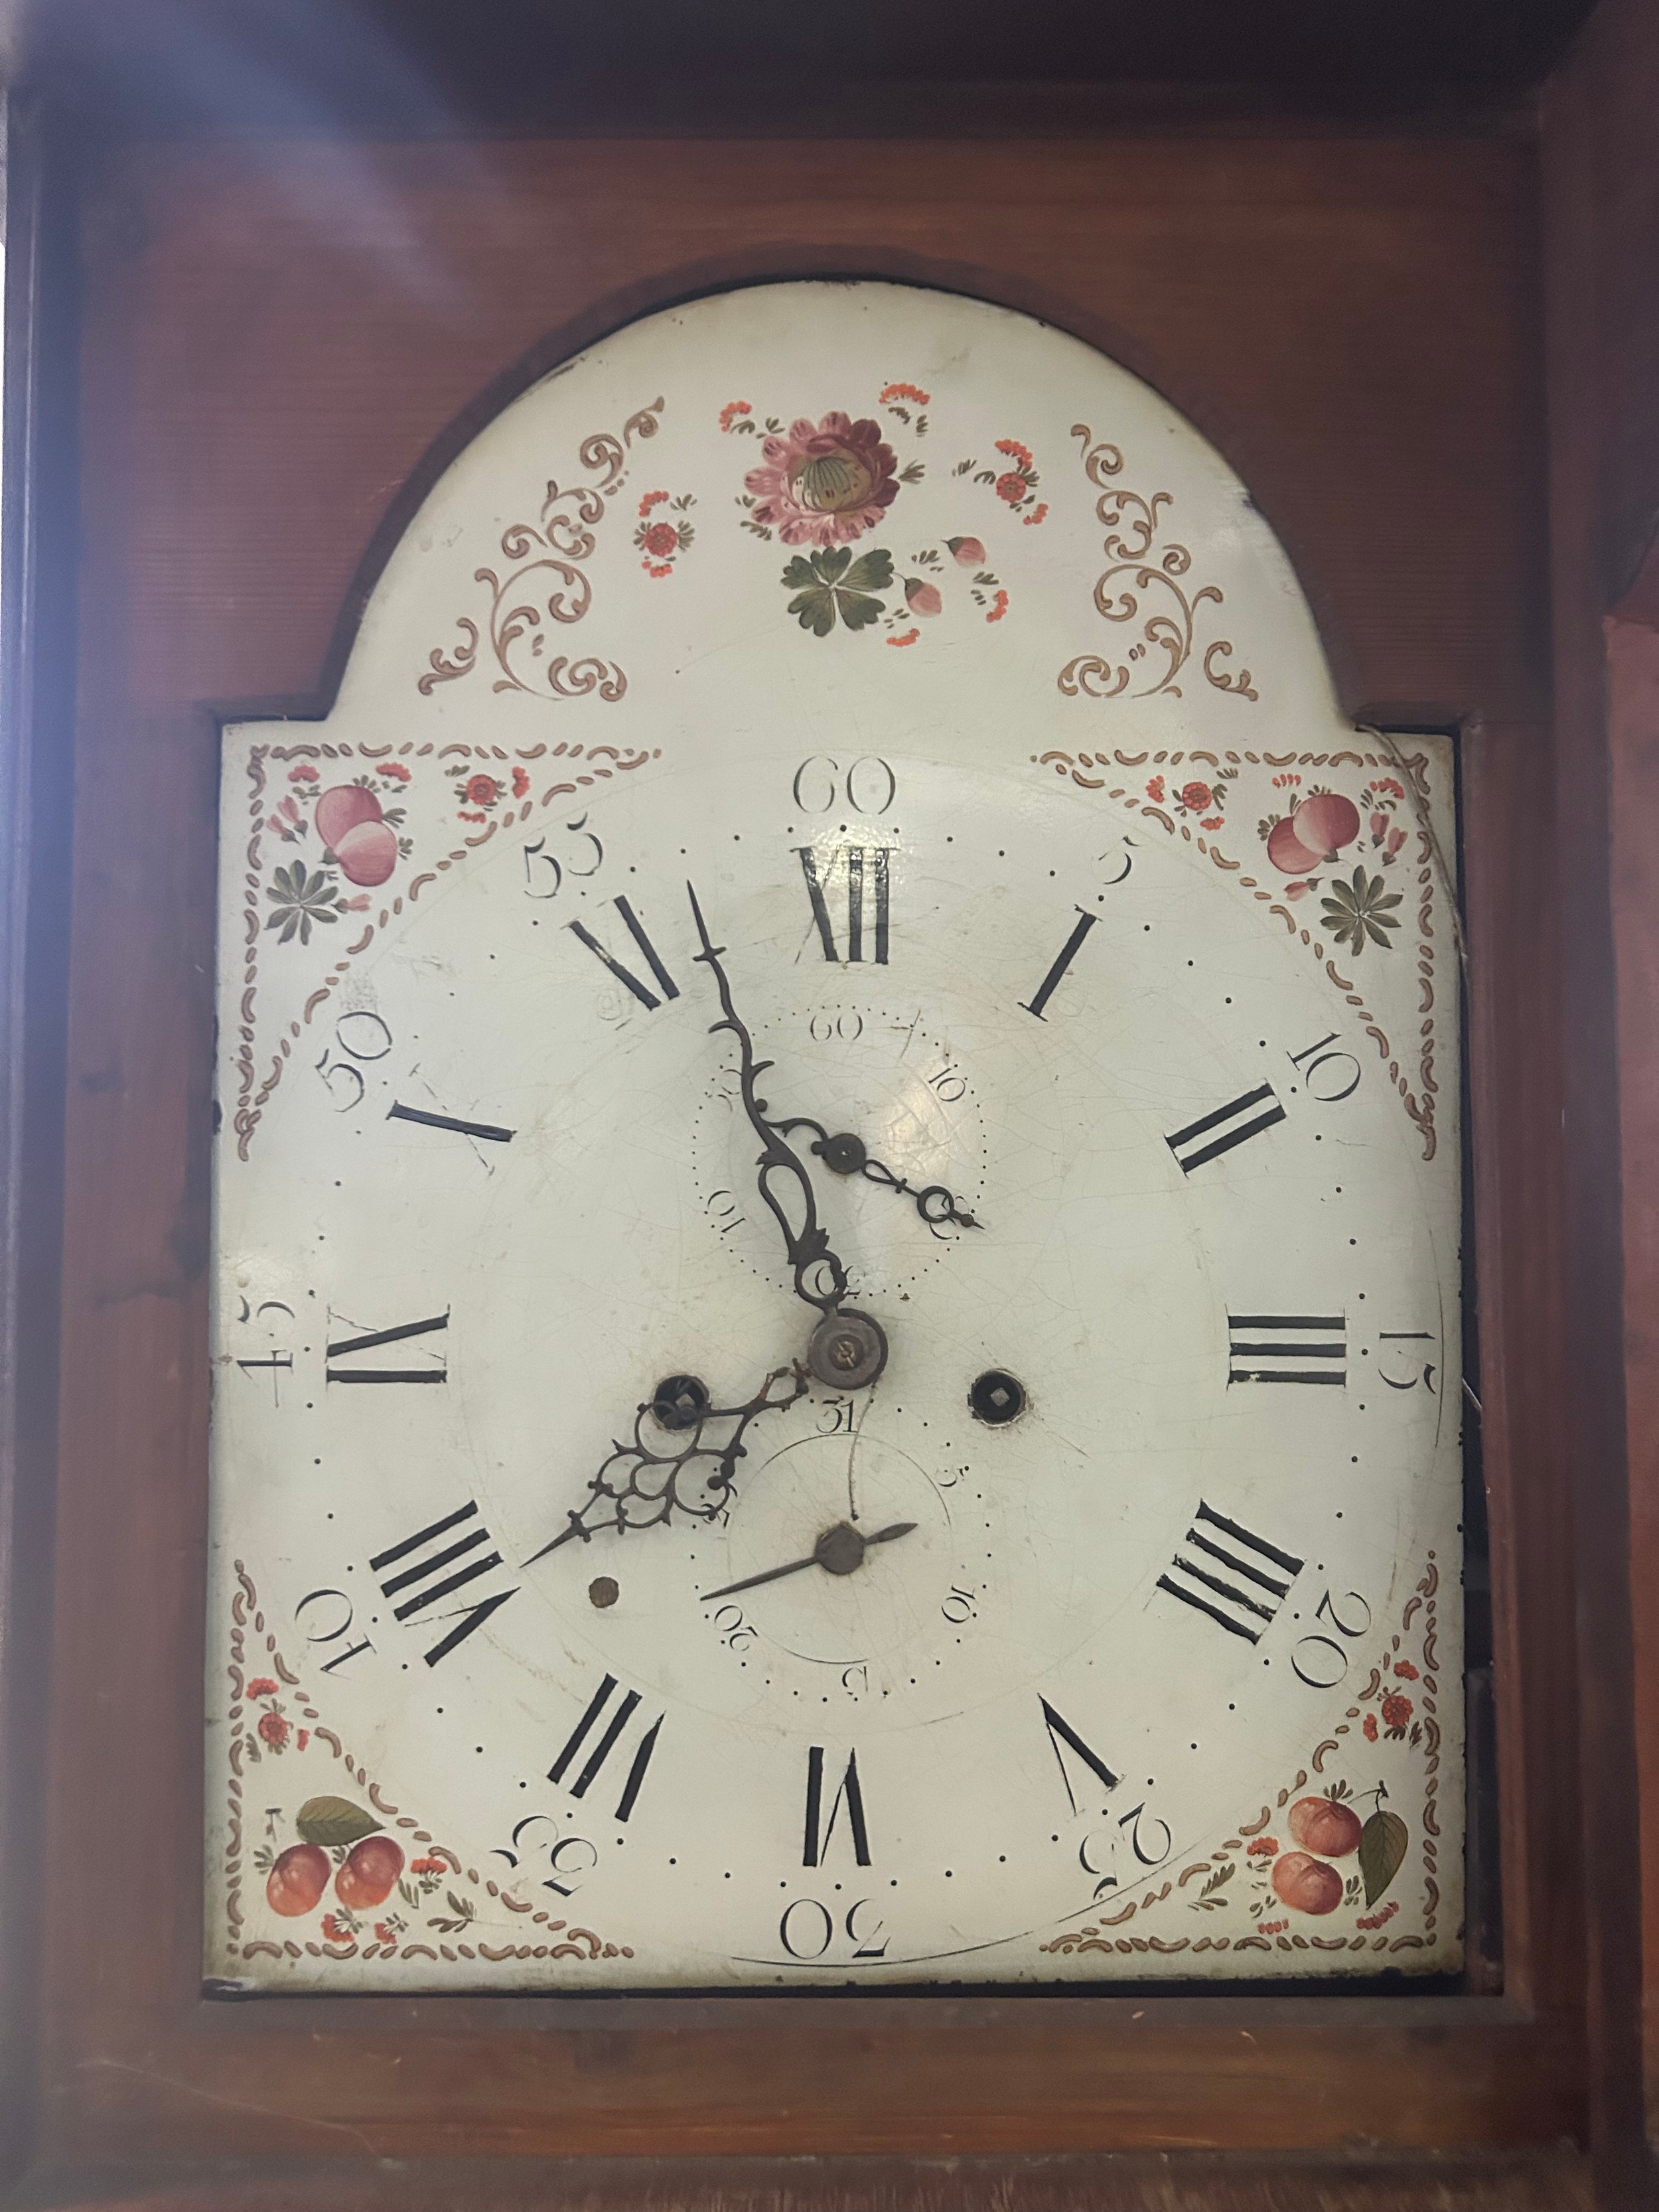 19th century mahogany cased grandfather clock, the enamel face with hand painted design - Image 2 of 2